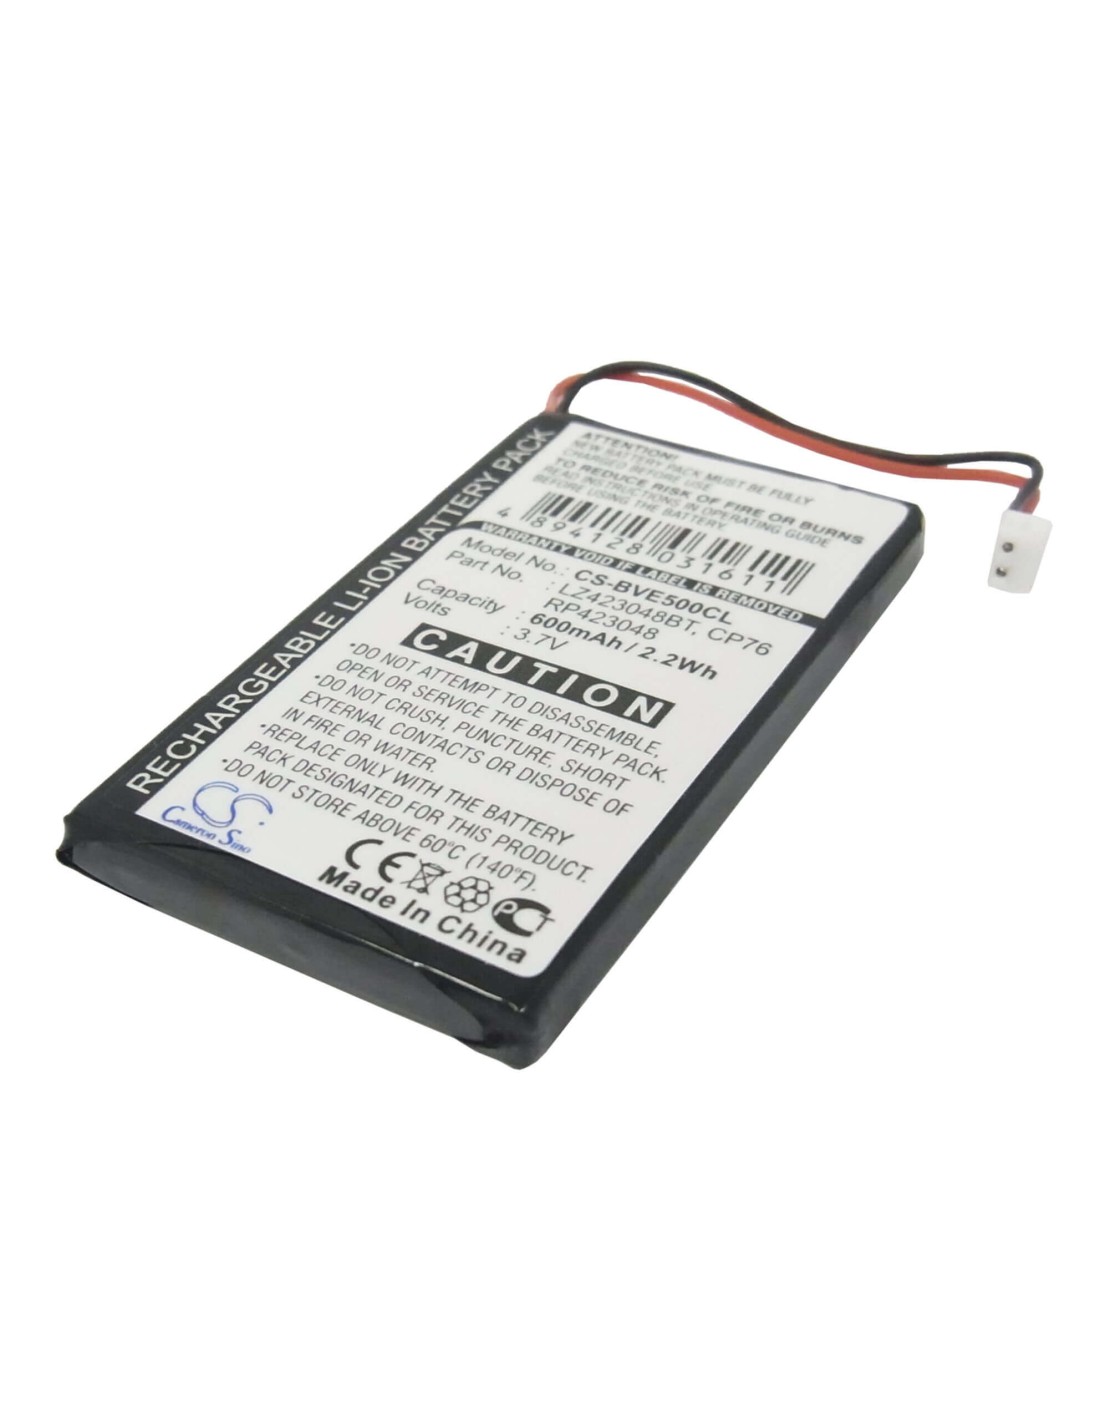 Battery for Grundig, Calios 1, Calios 1a, 3.7V, 600mAh - 2.22Wh